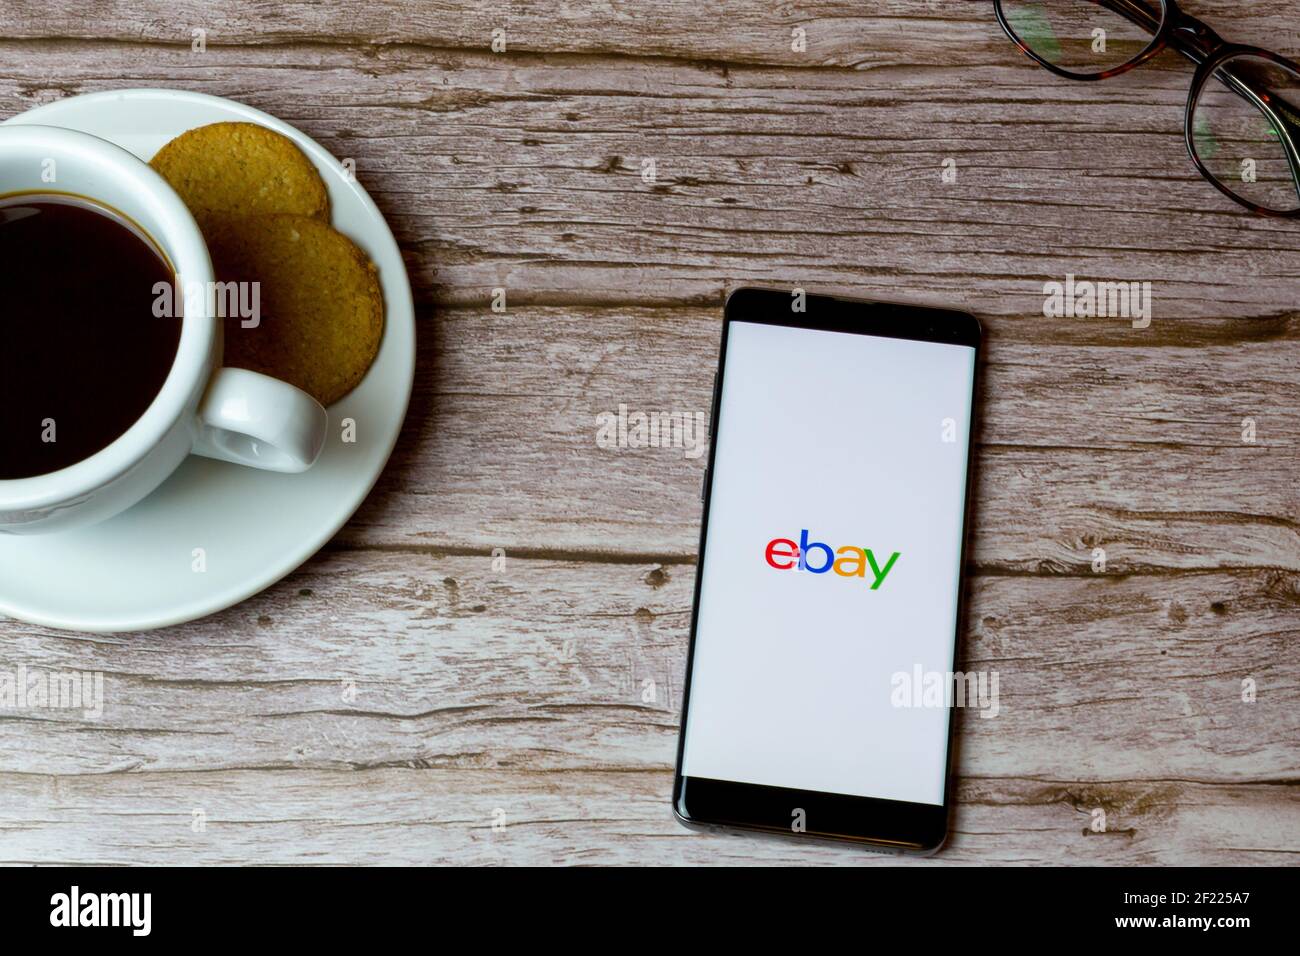 A Mobile phone or cell phone laid on a wooden table with an Ebay app opening also a coffee and glasses Stock Photo